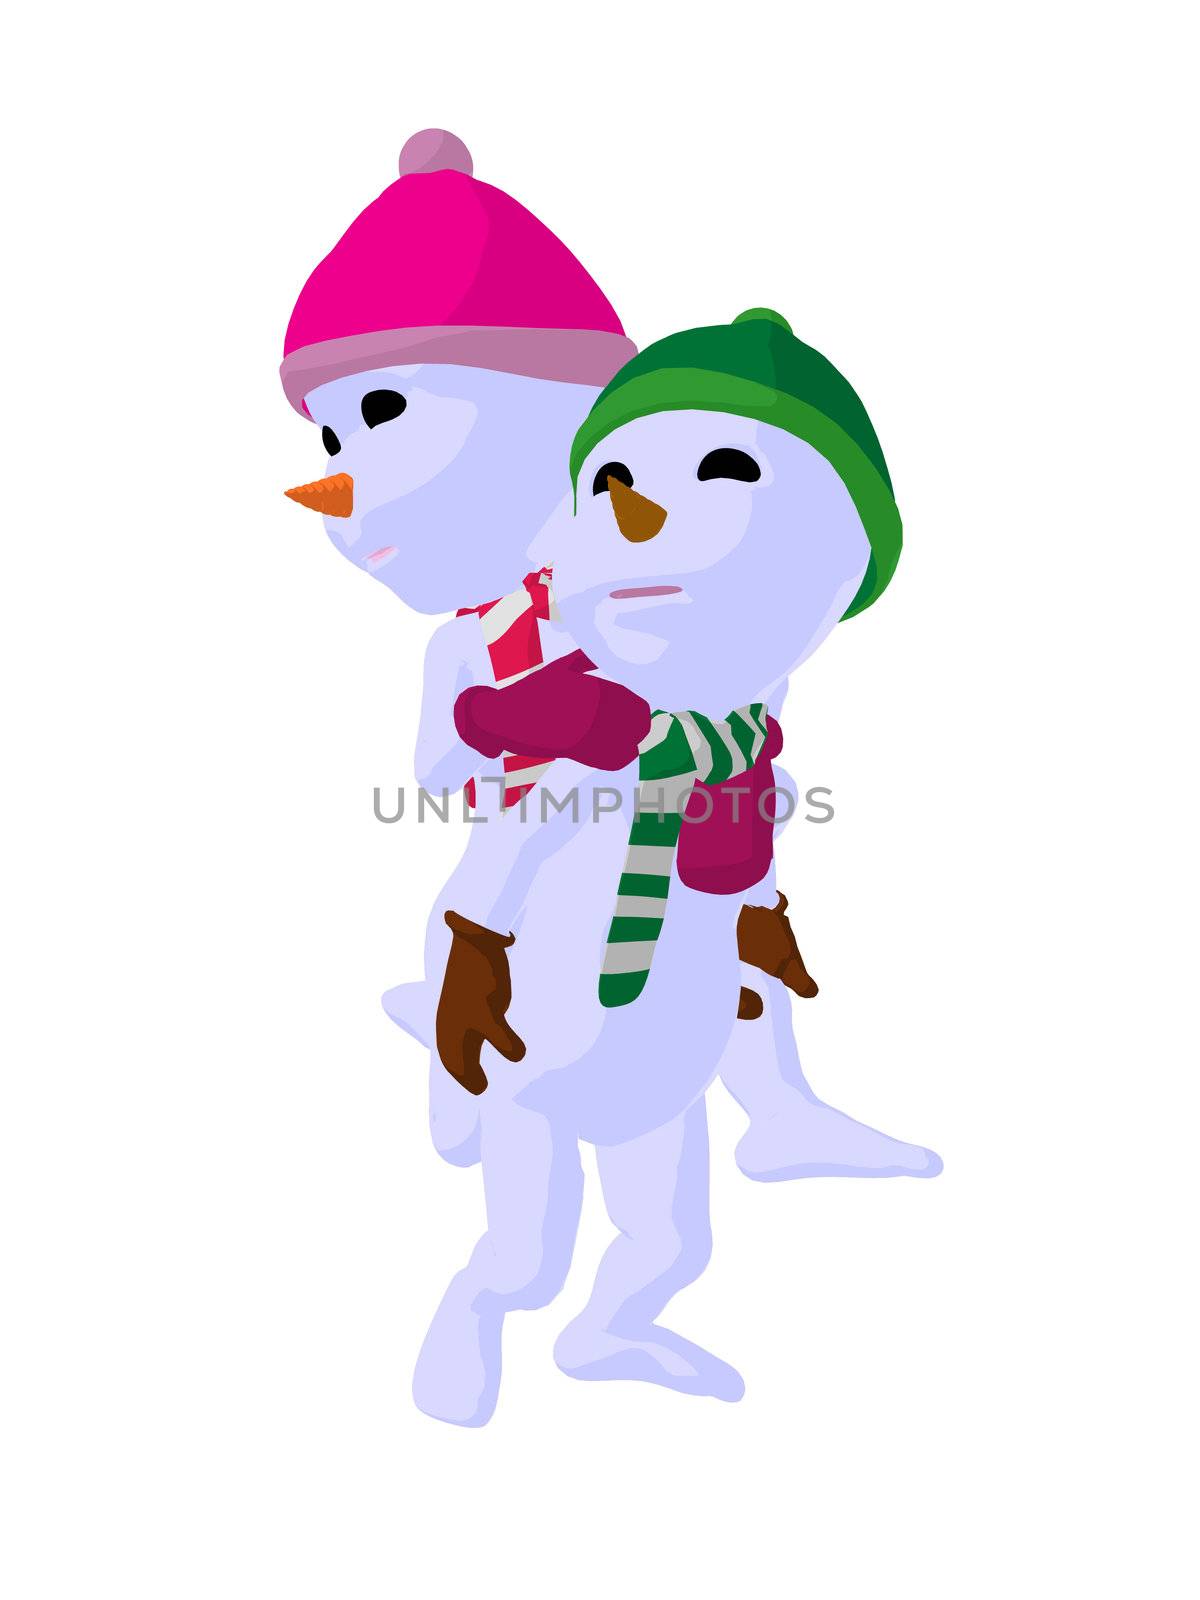 Snowboy and Snowgirl Couple Art Illustration Silhouette by kathygold